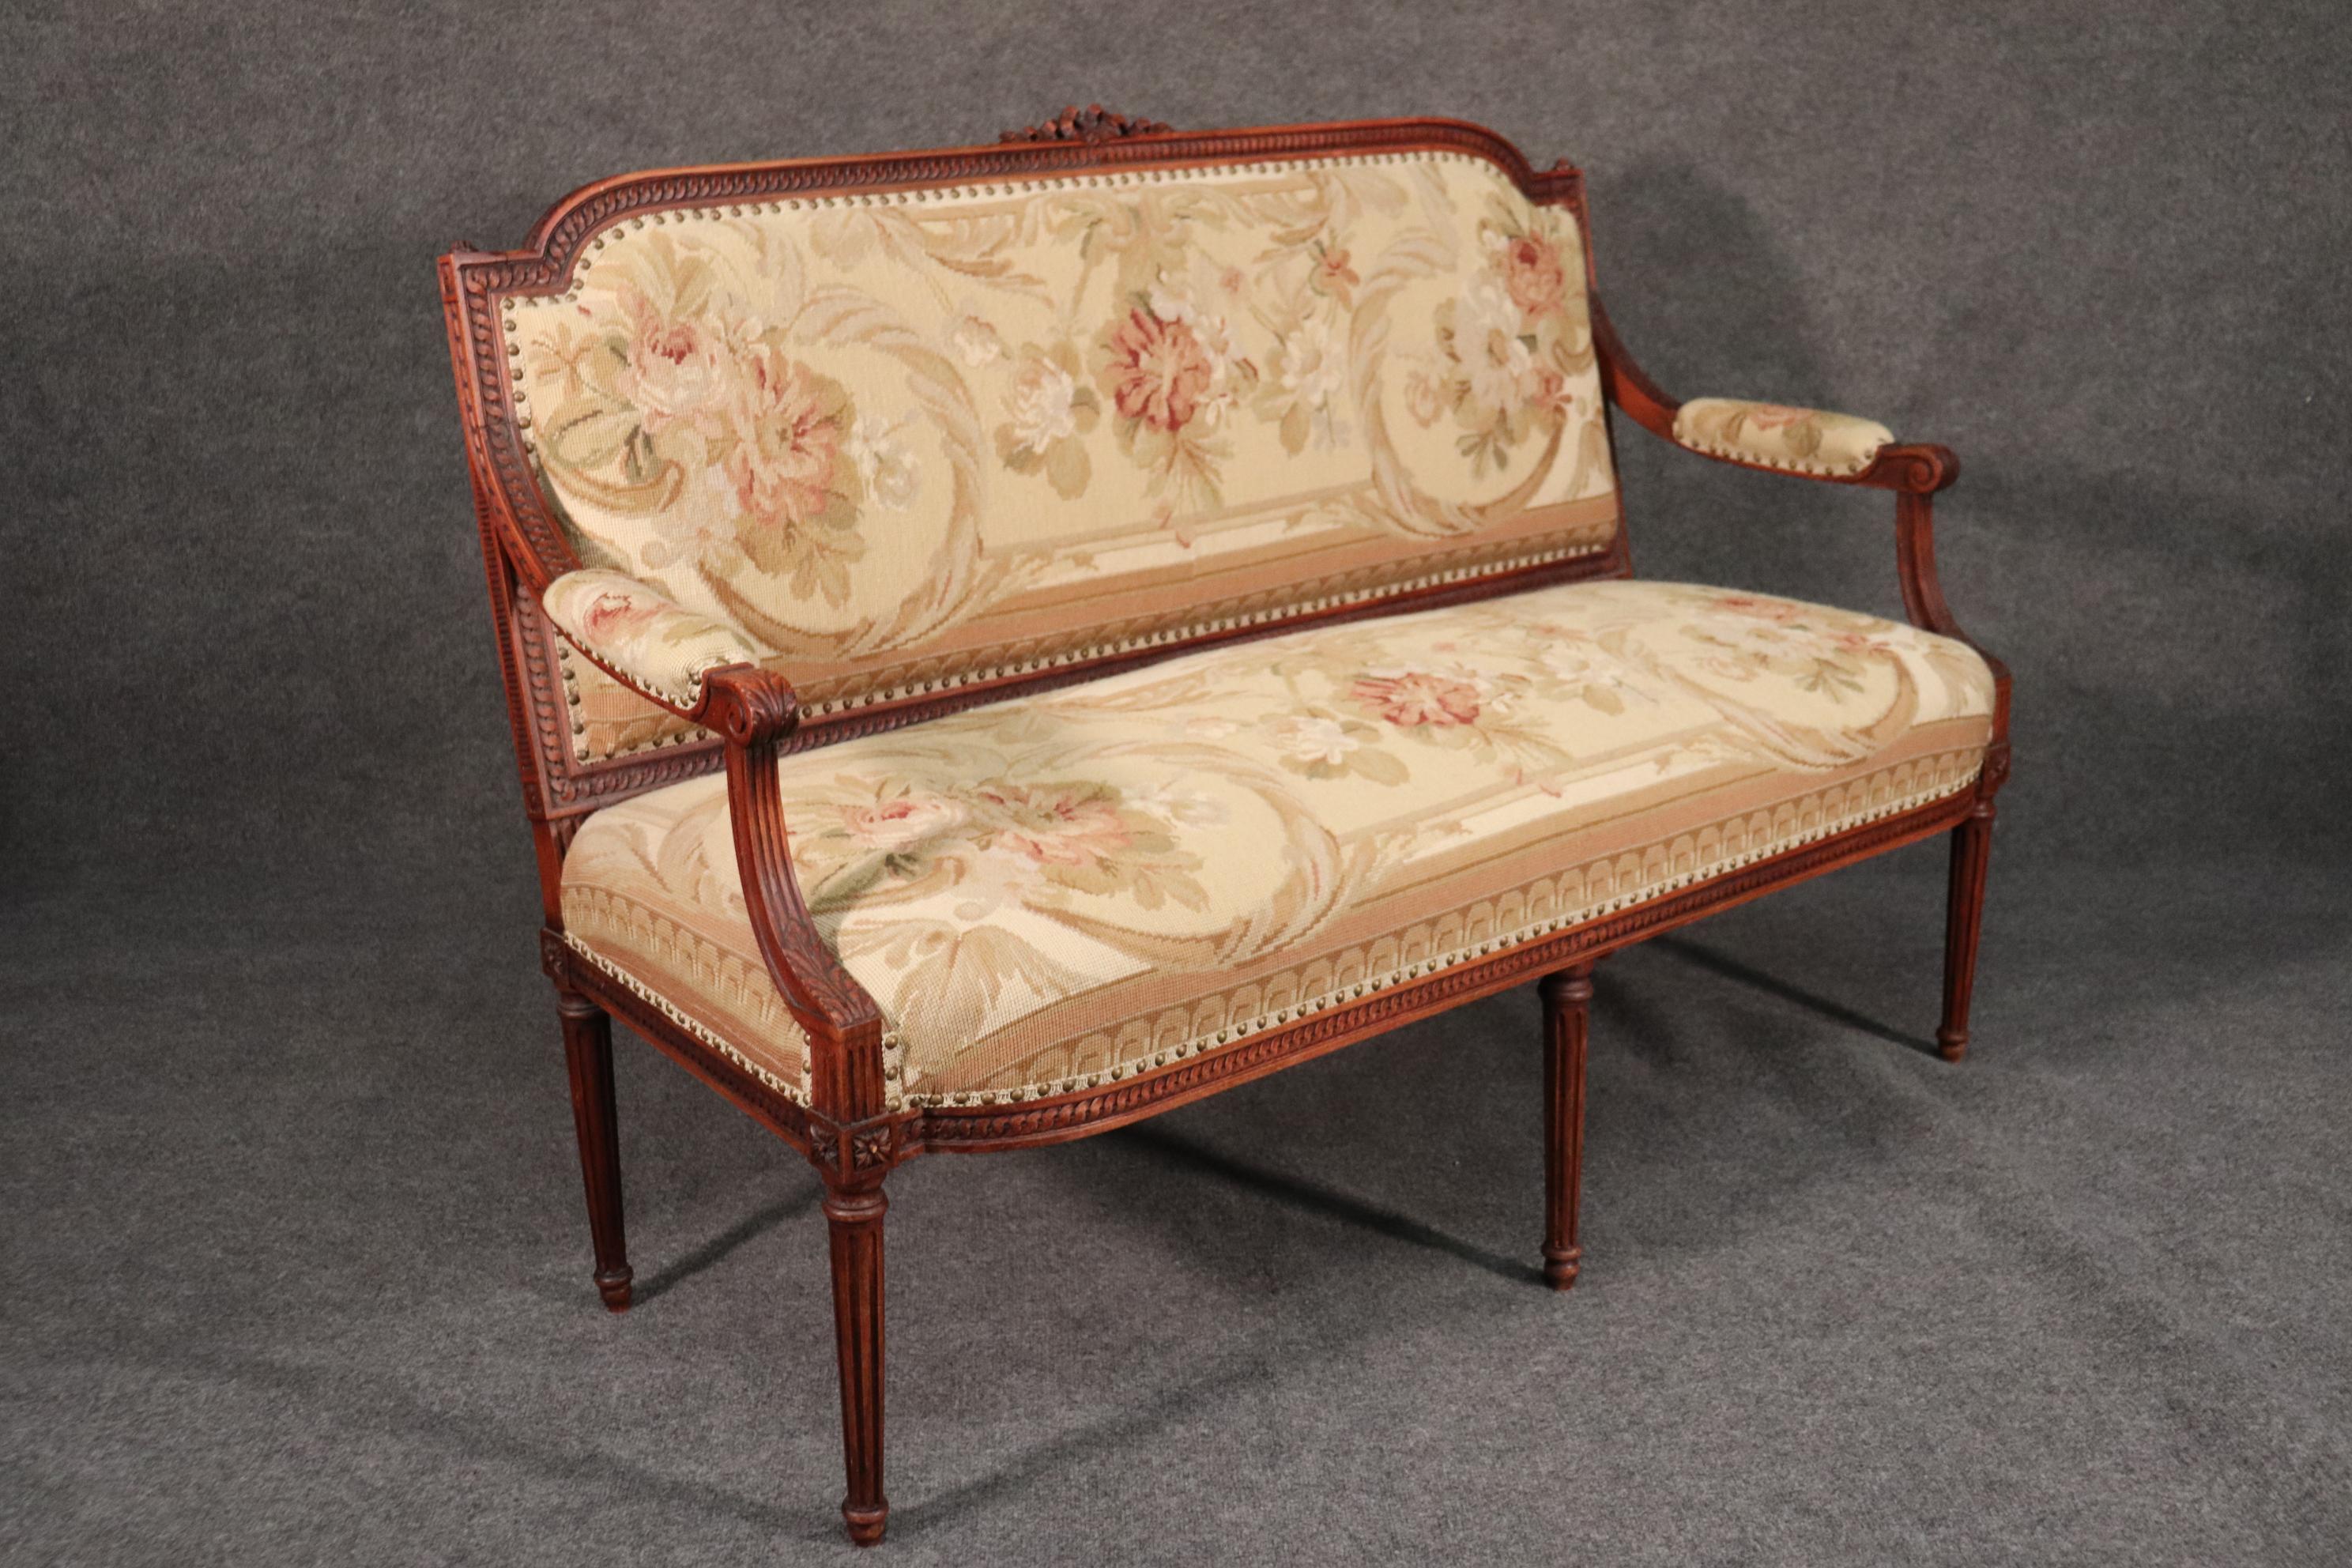 This is a fantastic settee that is beautifully carved and in very good antique condition. The settee features a tapestry upholstery and the tapestry is in good condition as well. This is used but in good condition for its age. Expect some